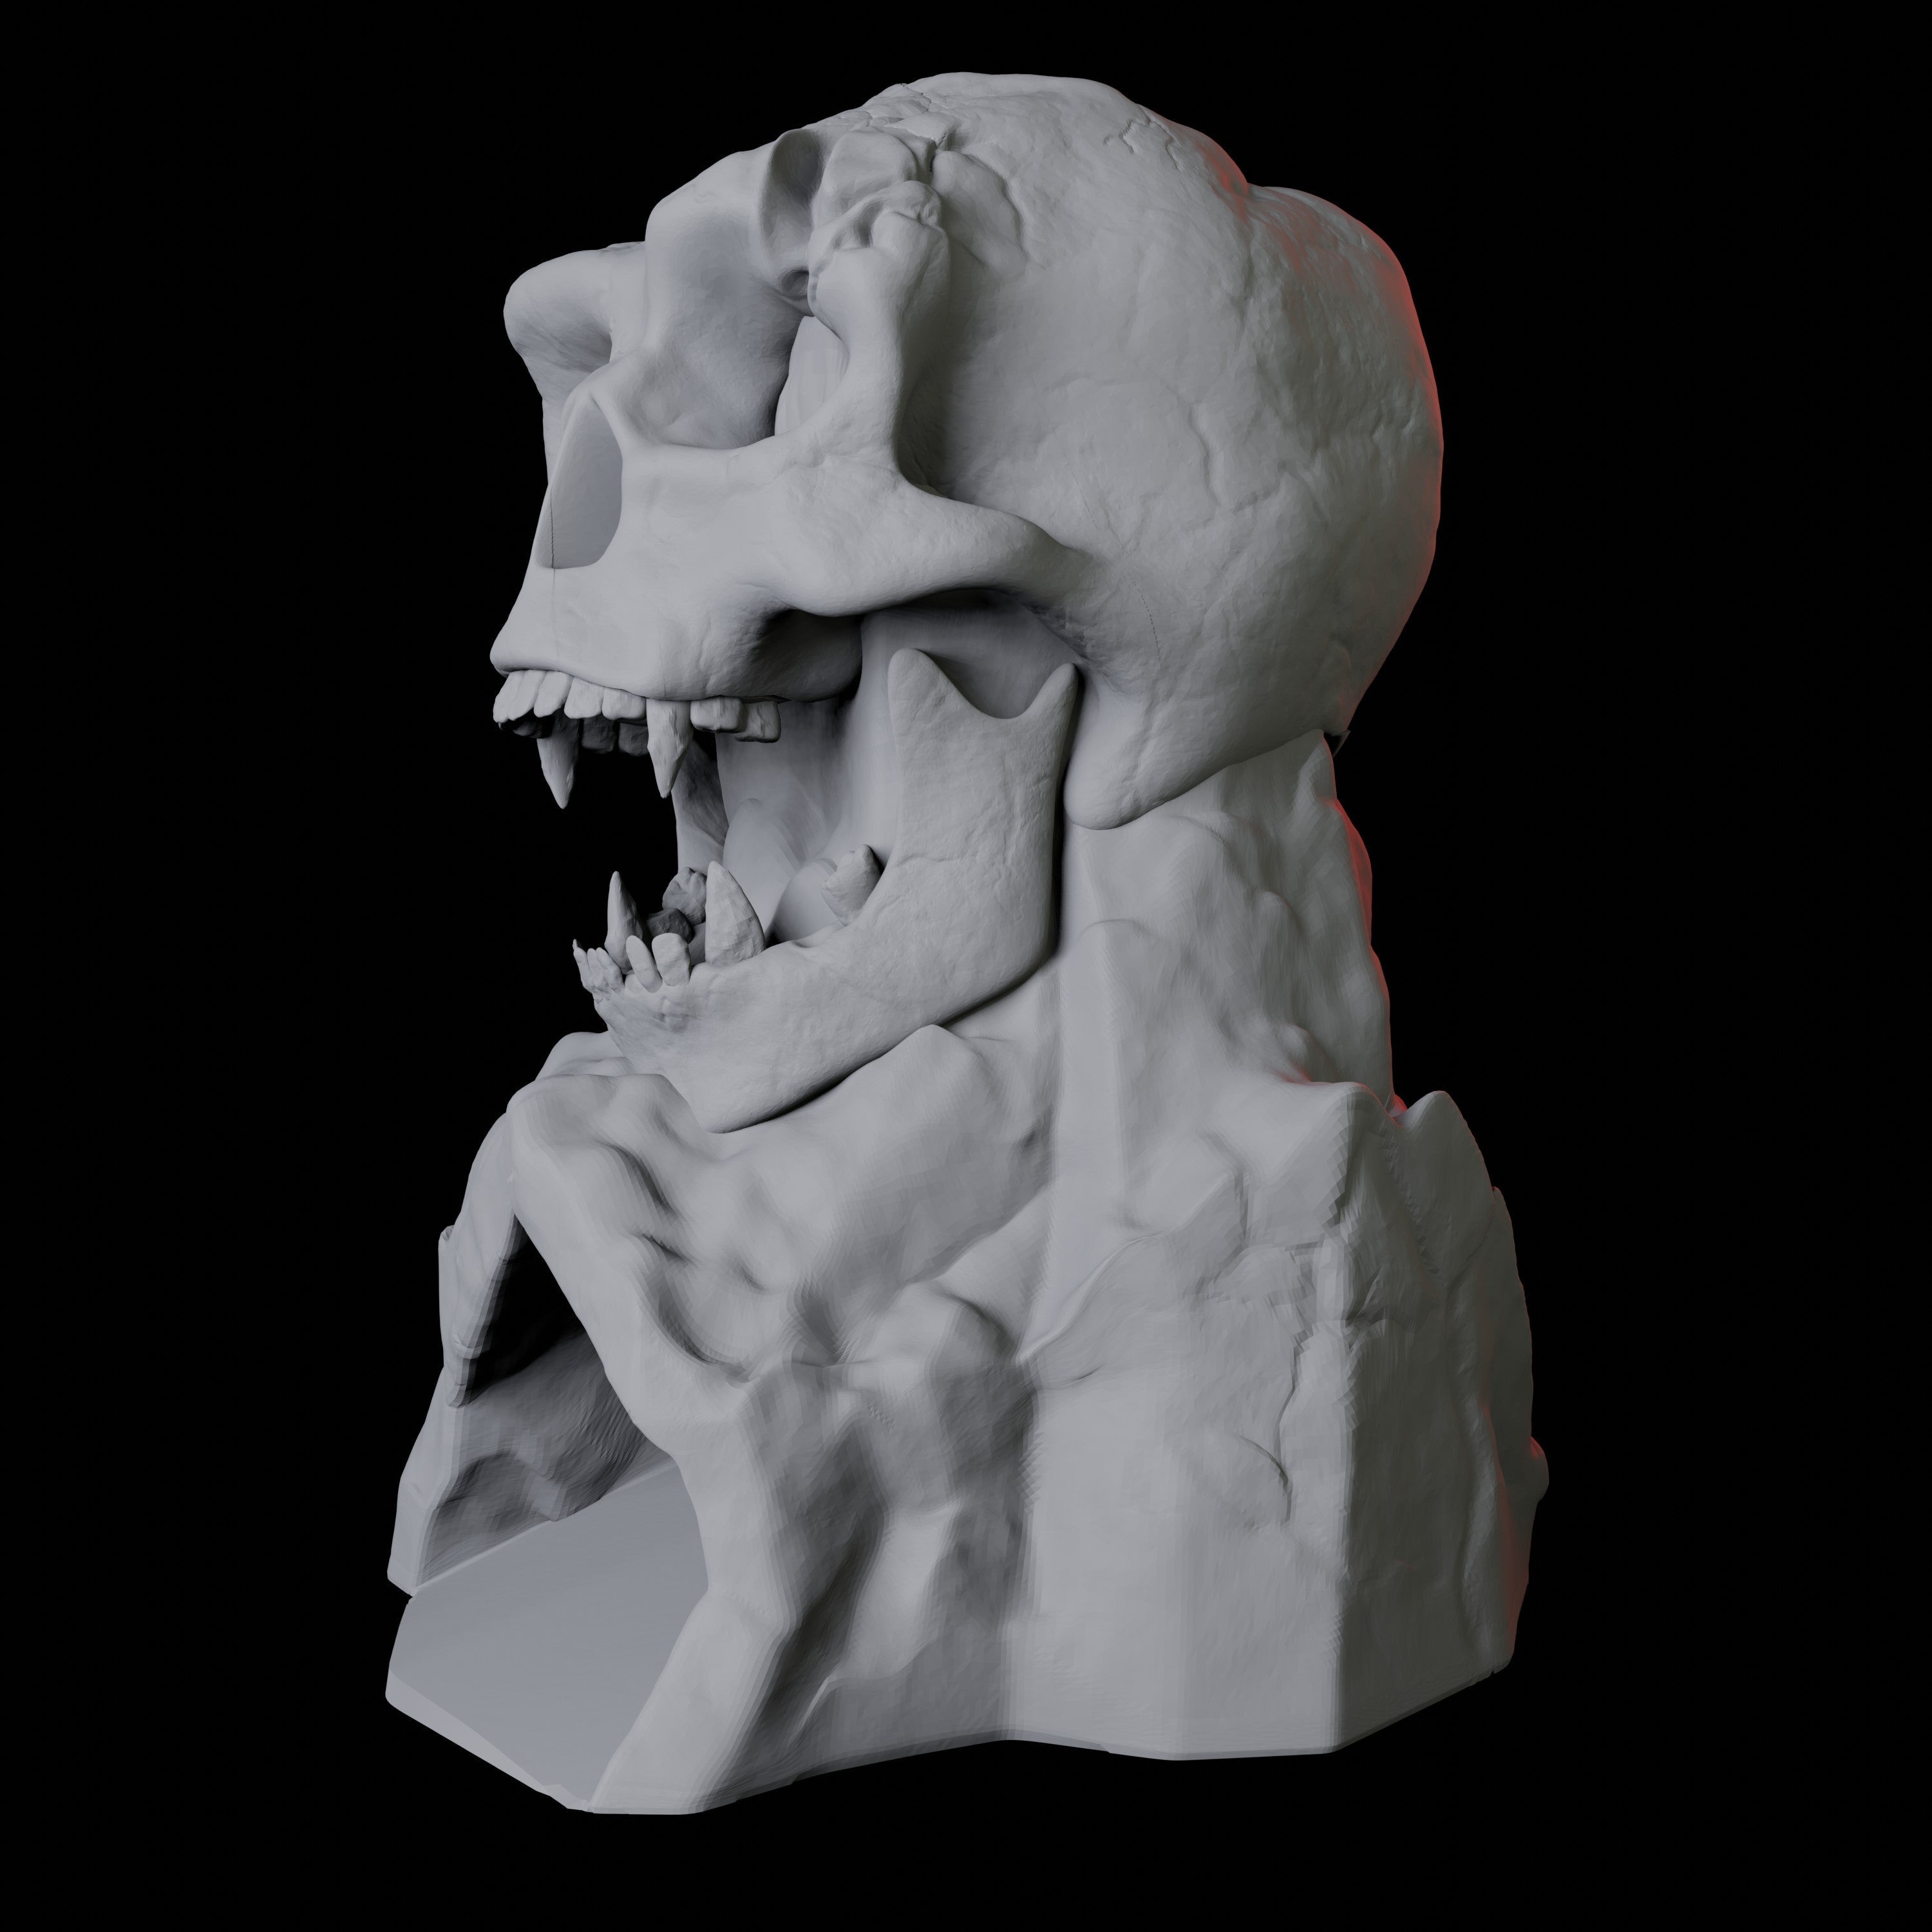 Skull Mountain Dice Tower Miniature for Dungeons and Dragons